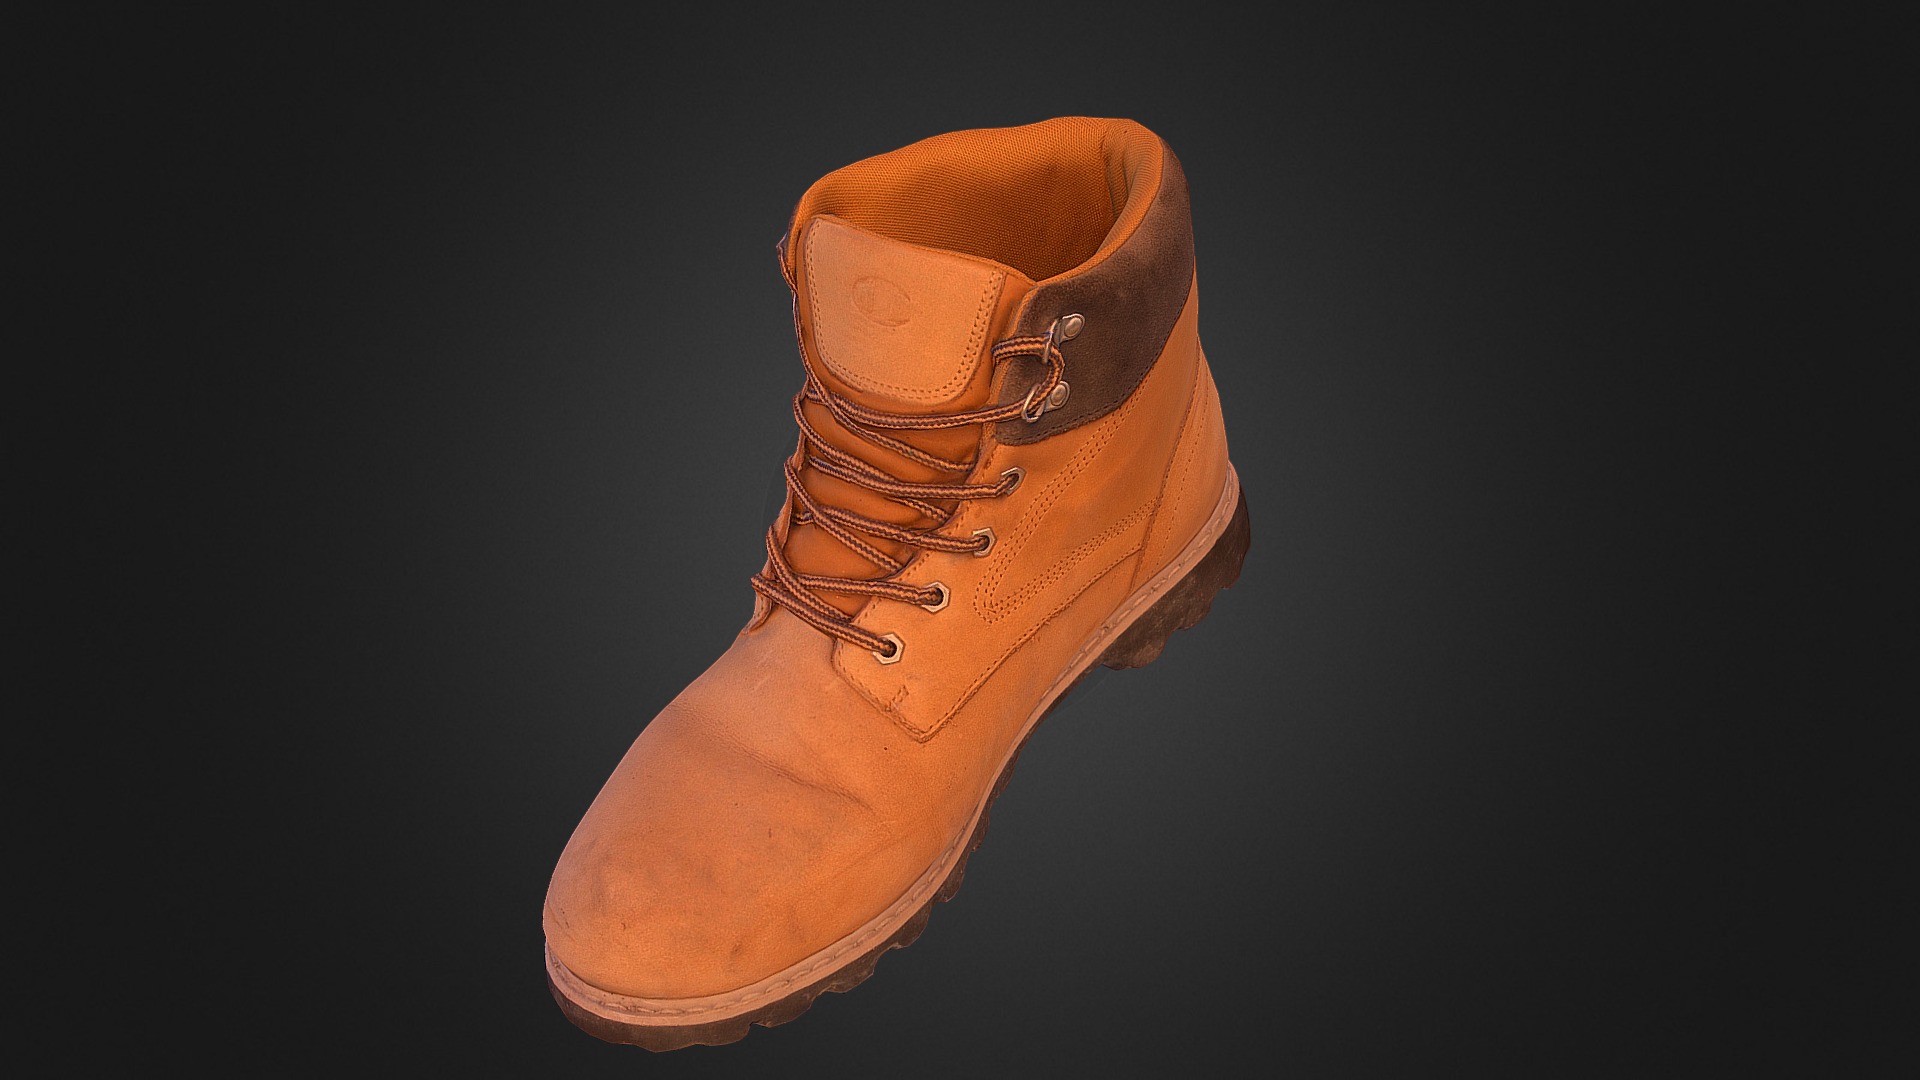 3D model Boot low poly 3D model - This is a 3D model of the Boot low poly 3D model. The 3D model is about a person's foot with a shoe on it.